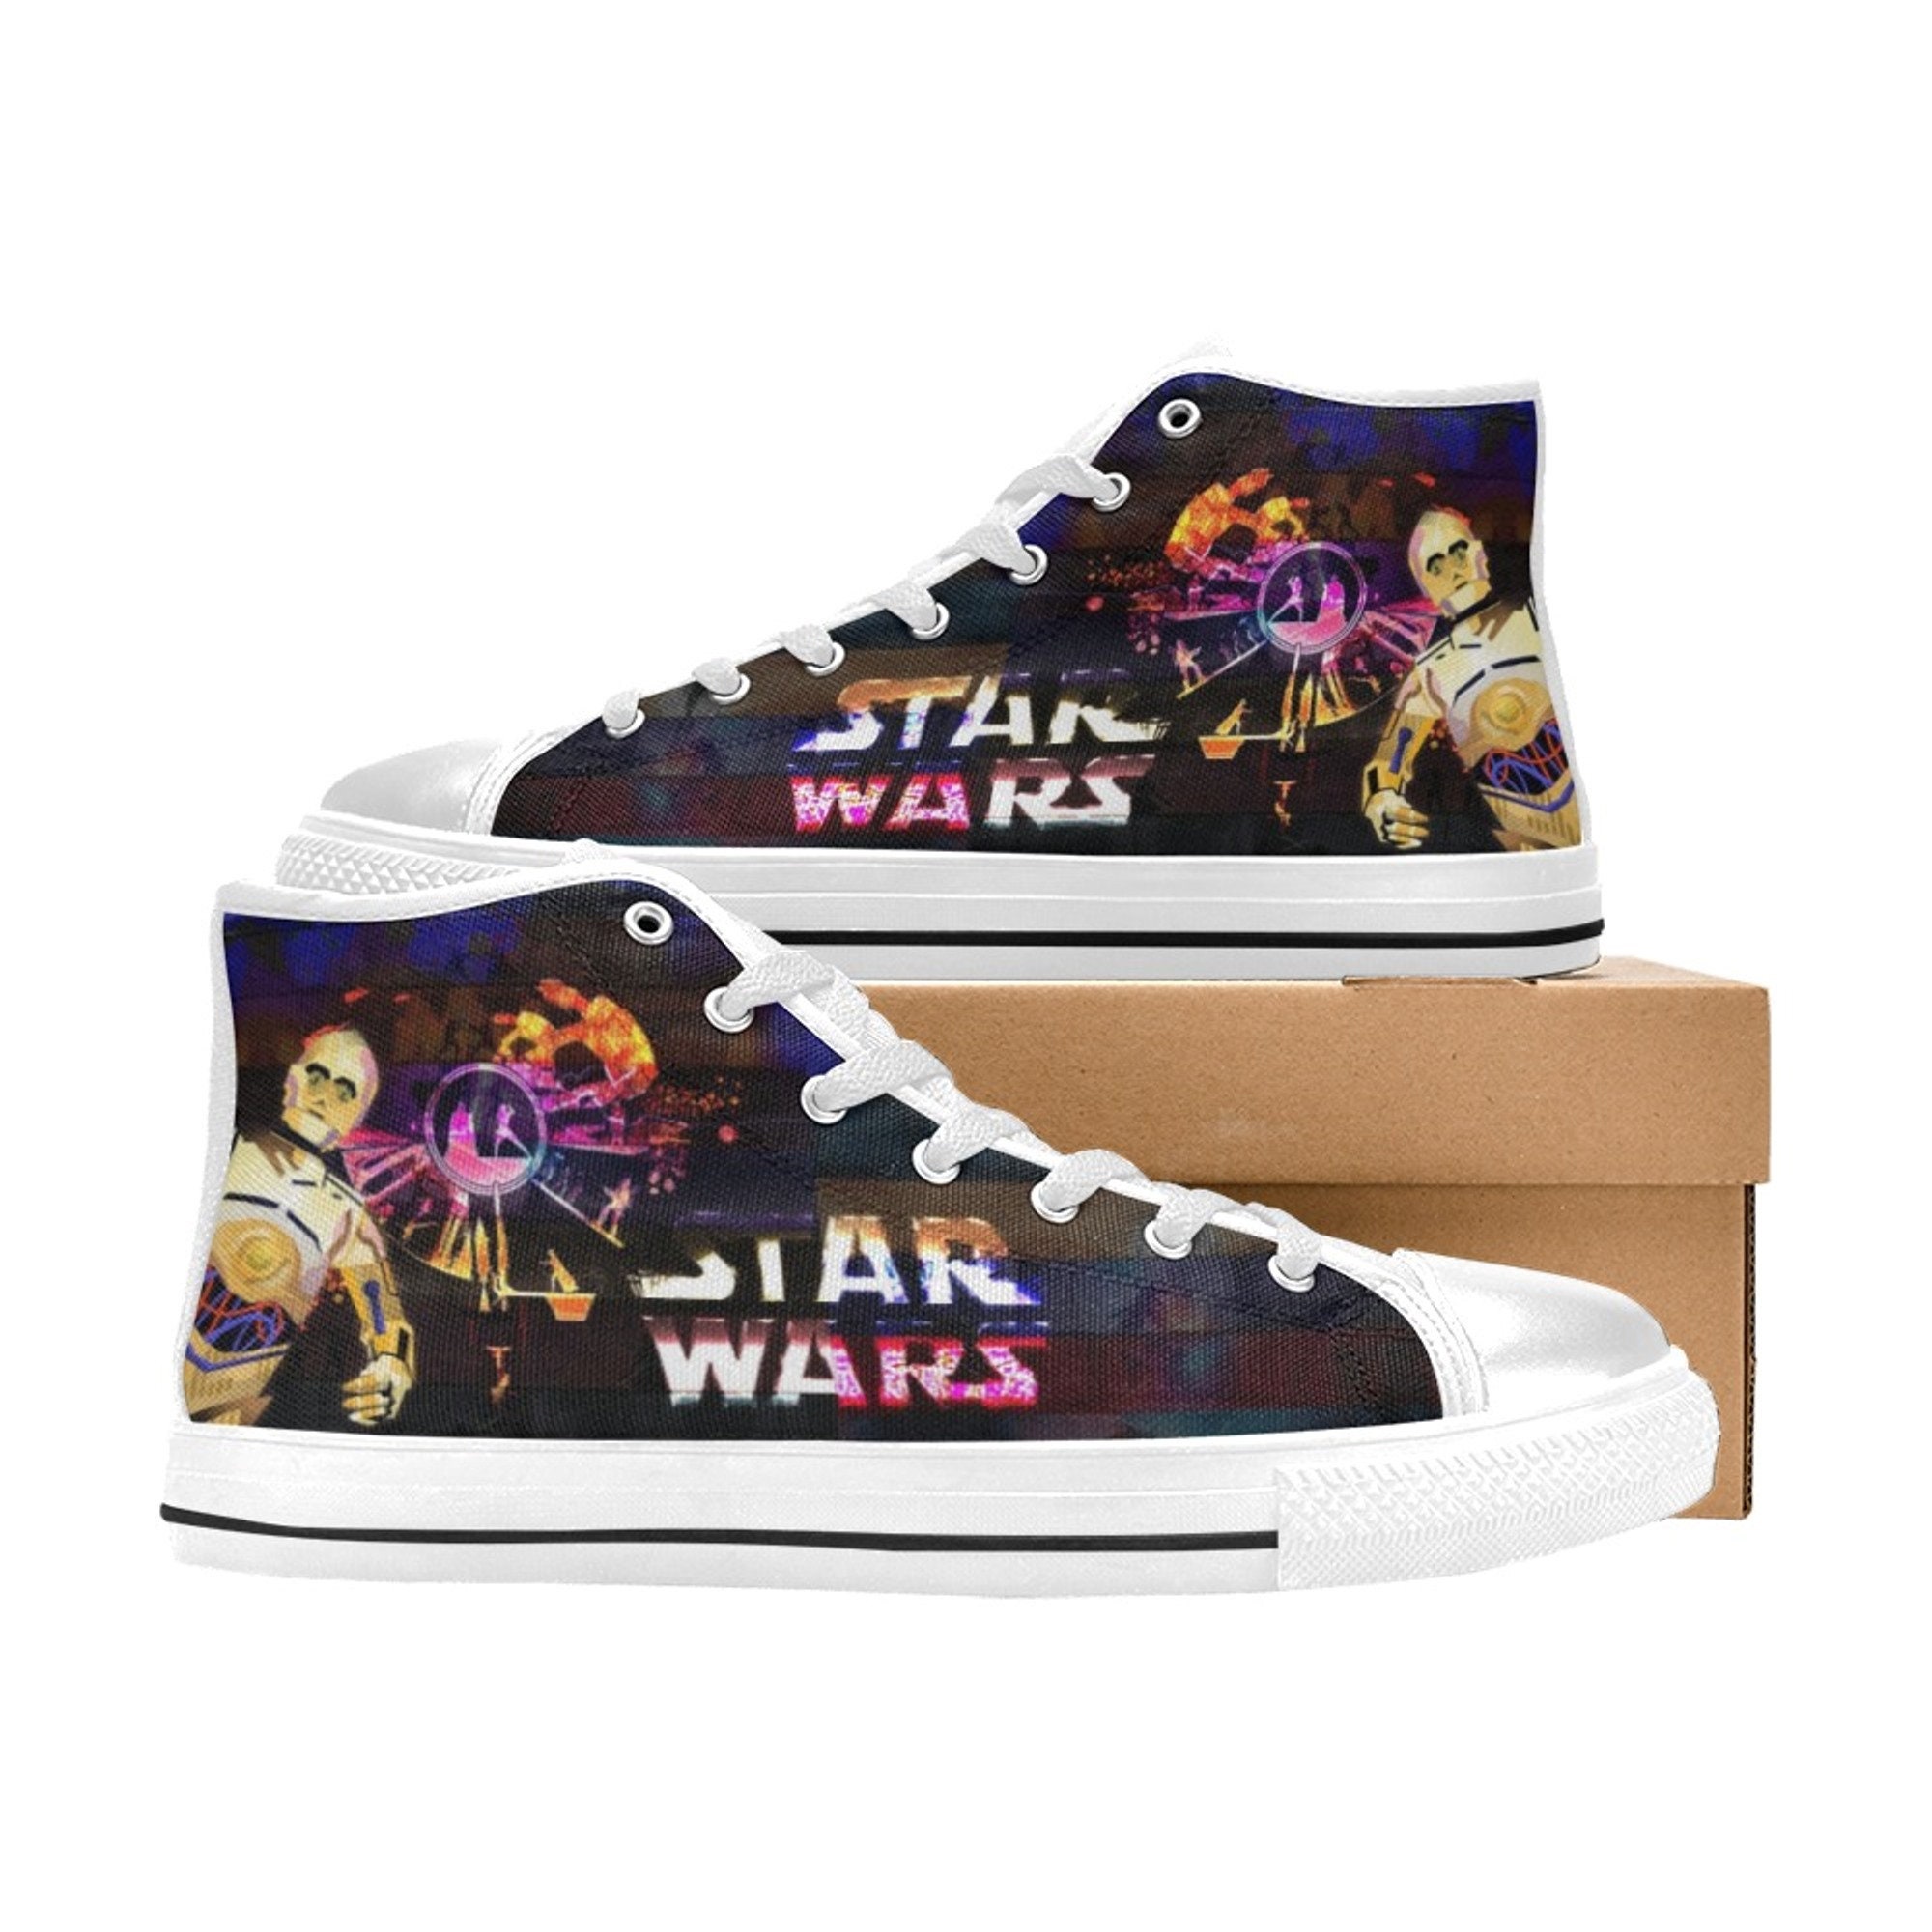 Star Wars Shoes Custom Unisex Adult Shoes, Canvas Shoes High Top